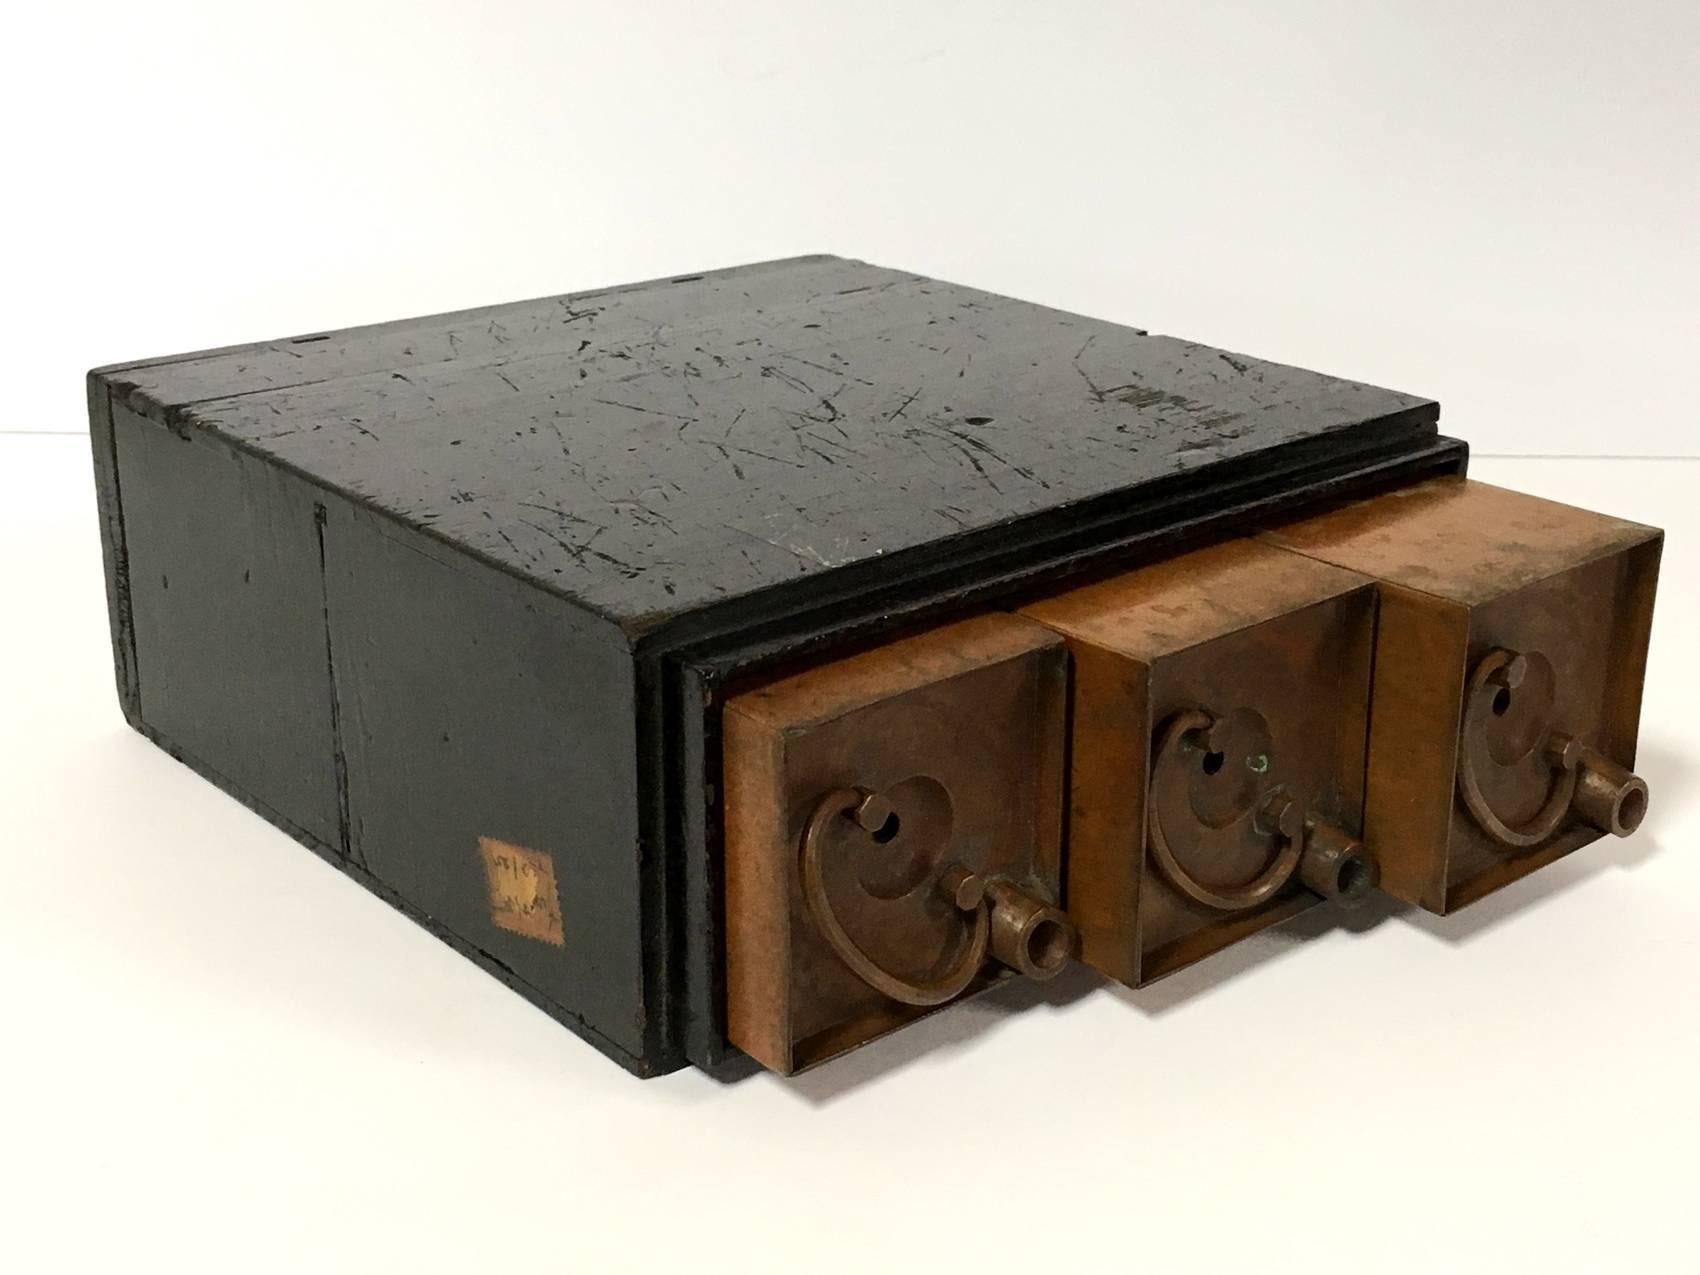 A rare set of three Japanese Meiji period copper containers, rectangular in form, fitted for a black lacquer wood box. The copper containers each measure; 8.5 inches tall, 2.5 inches width, 2.5 inches deep. The wood box measures; 8.5 inches H, 8.25